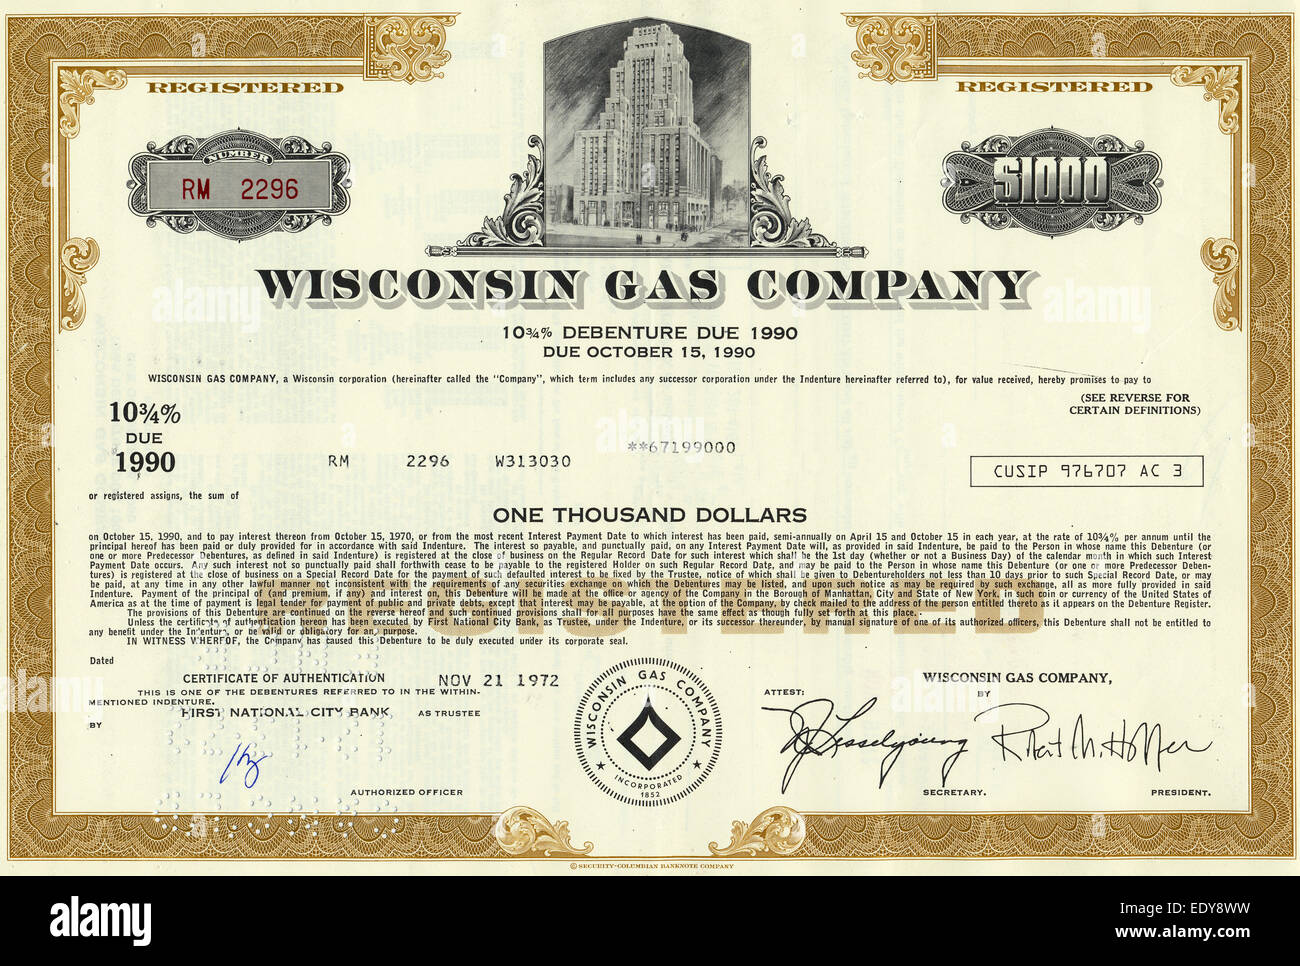 Historic share certificate, electrical power and natural gas company, Wisconsin Gas Company, 1000 Dollar, 1972, Wisconsin, USA Stock Photo